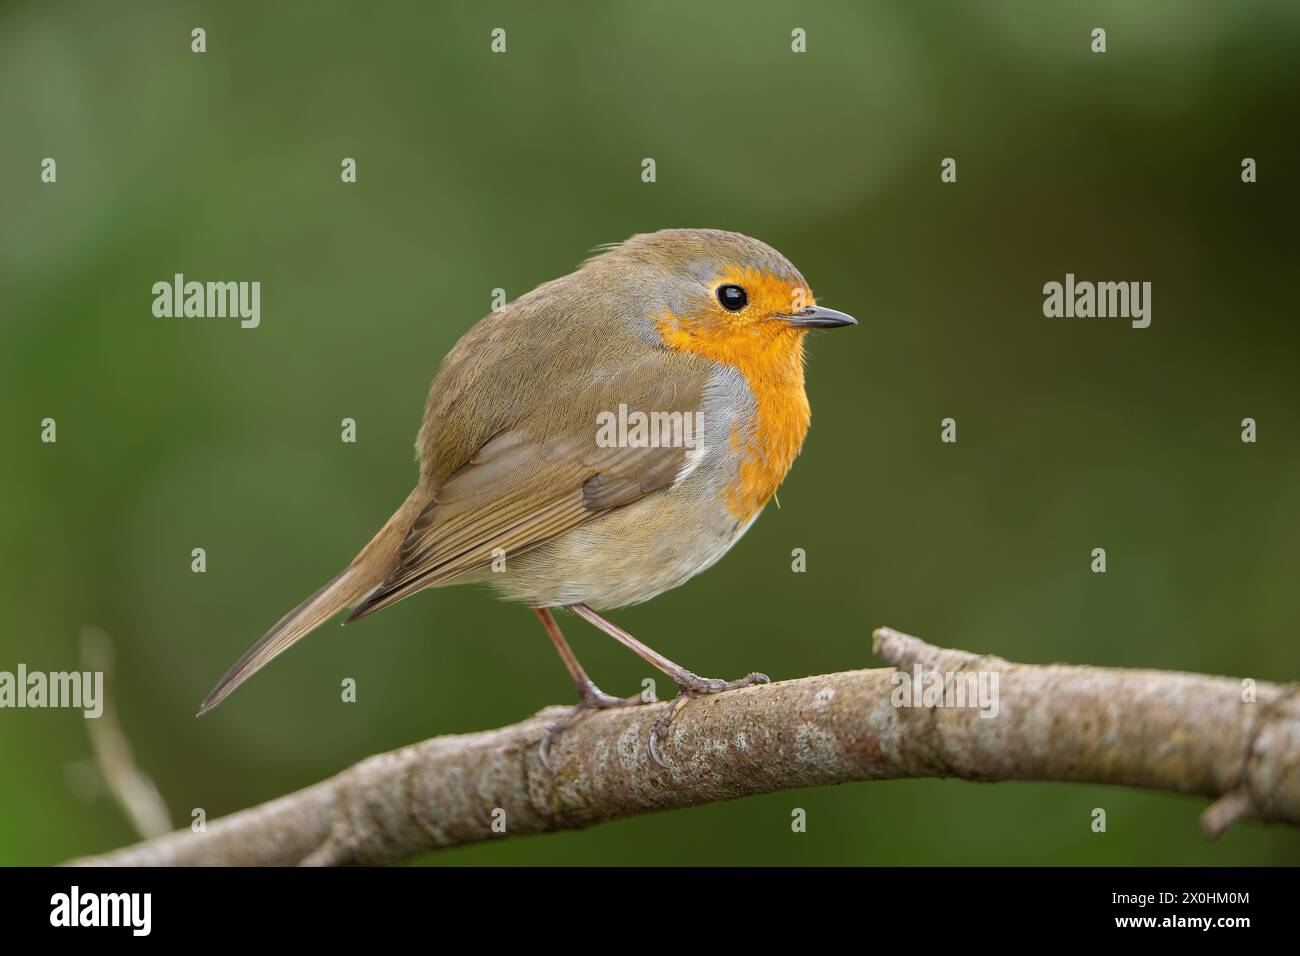 Close, detailed, side view of a wild, UK robin bird (Erithacus rubecula) standing isolated on a tree branch. Stock Photo